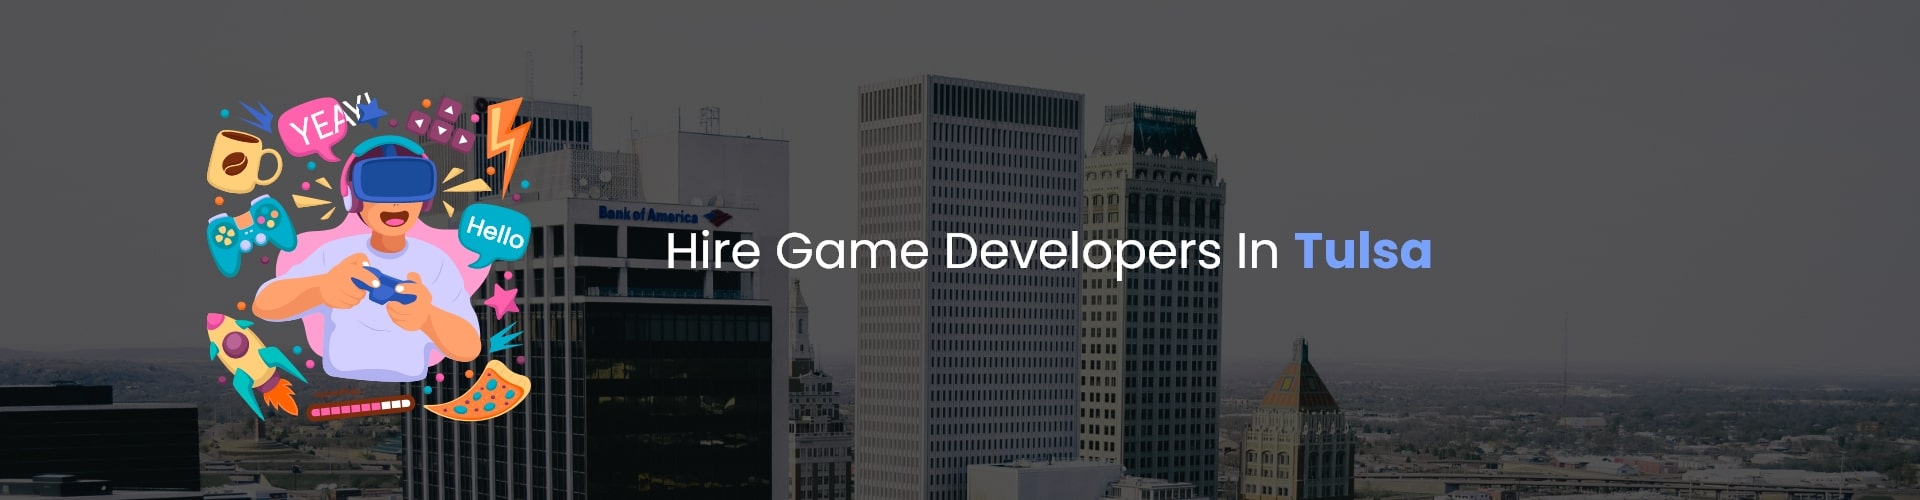 hire game developers in tulsa